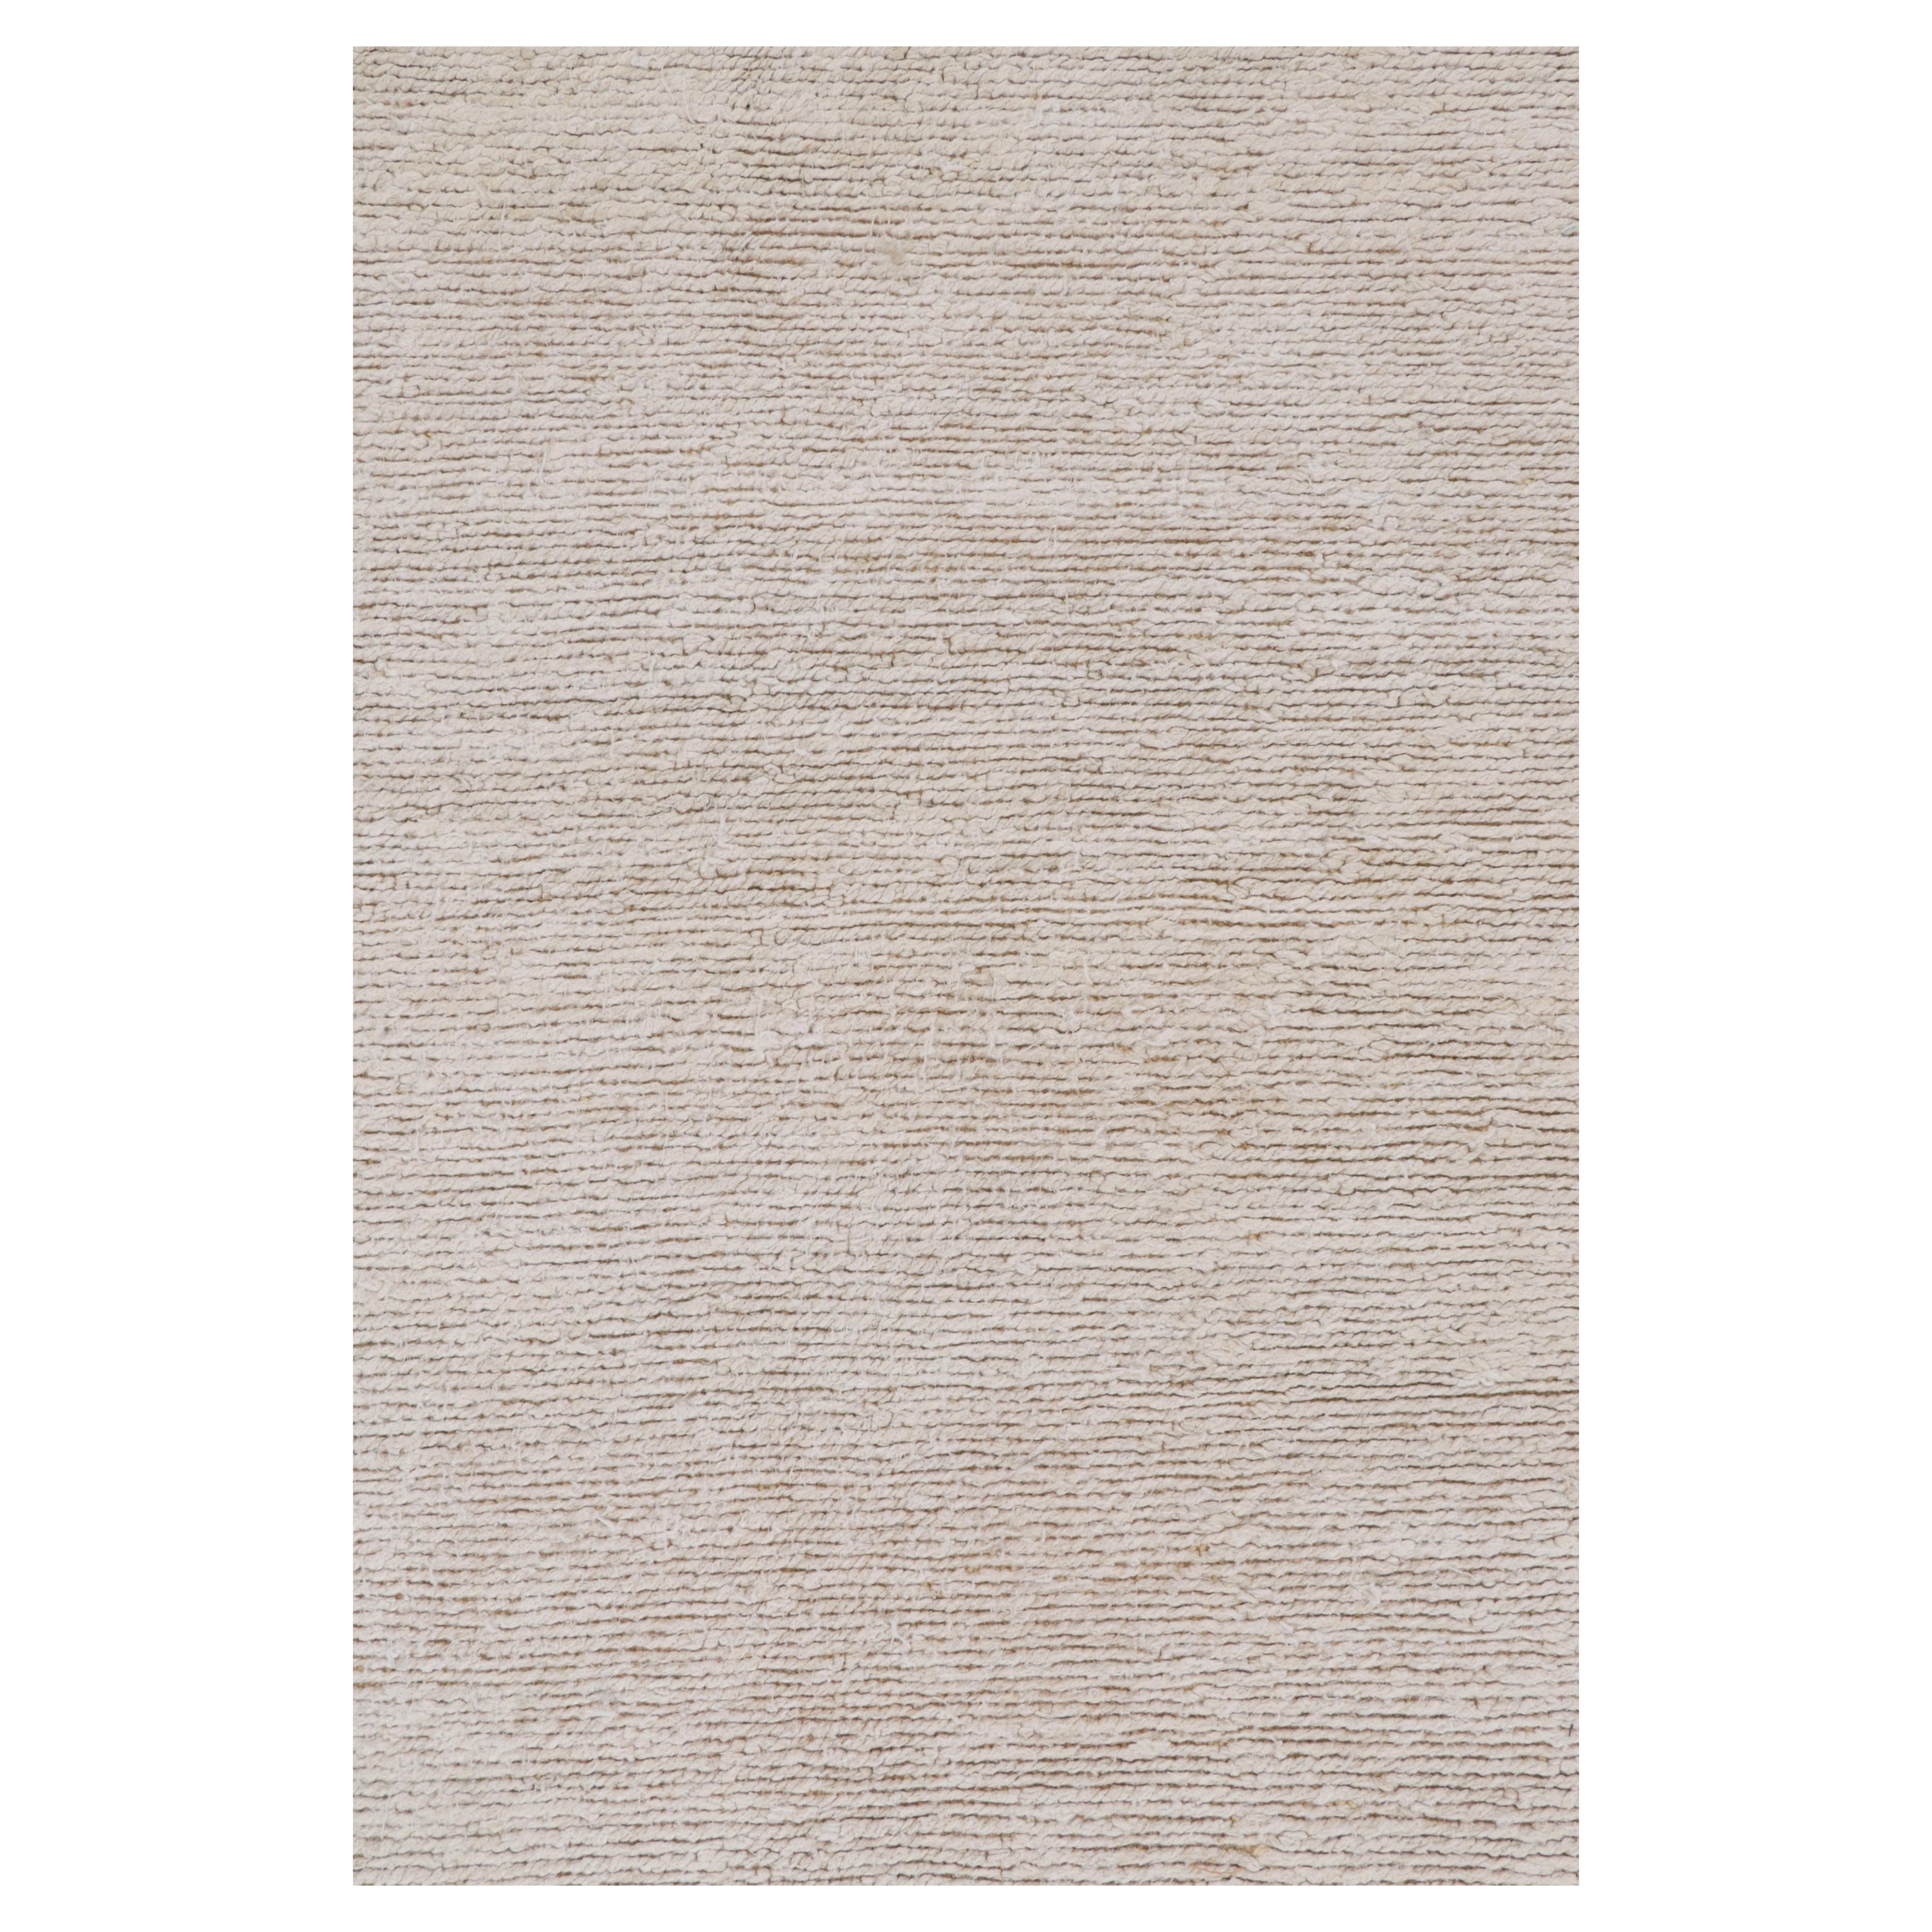 Rug & Kilim’s Contemporary Hemp Rug in Beige and Off-White Tones For Sale